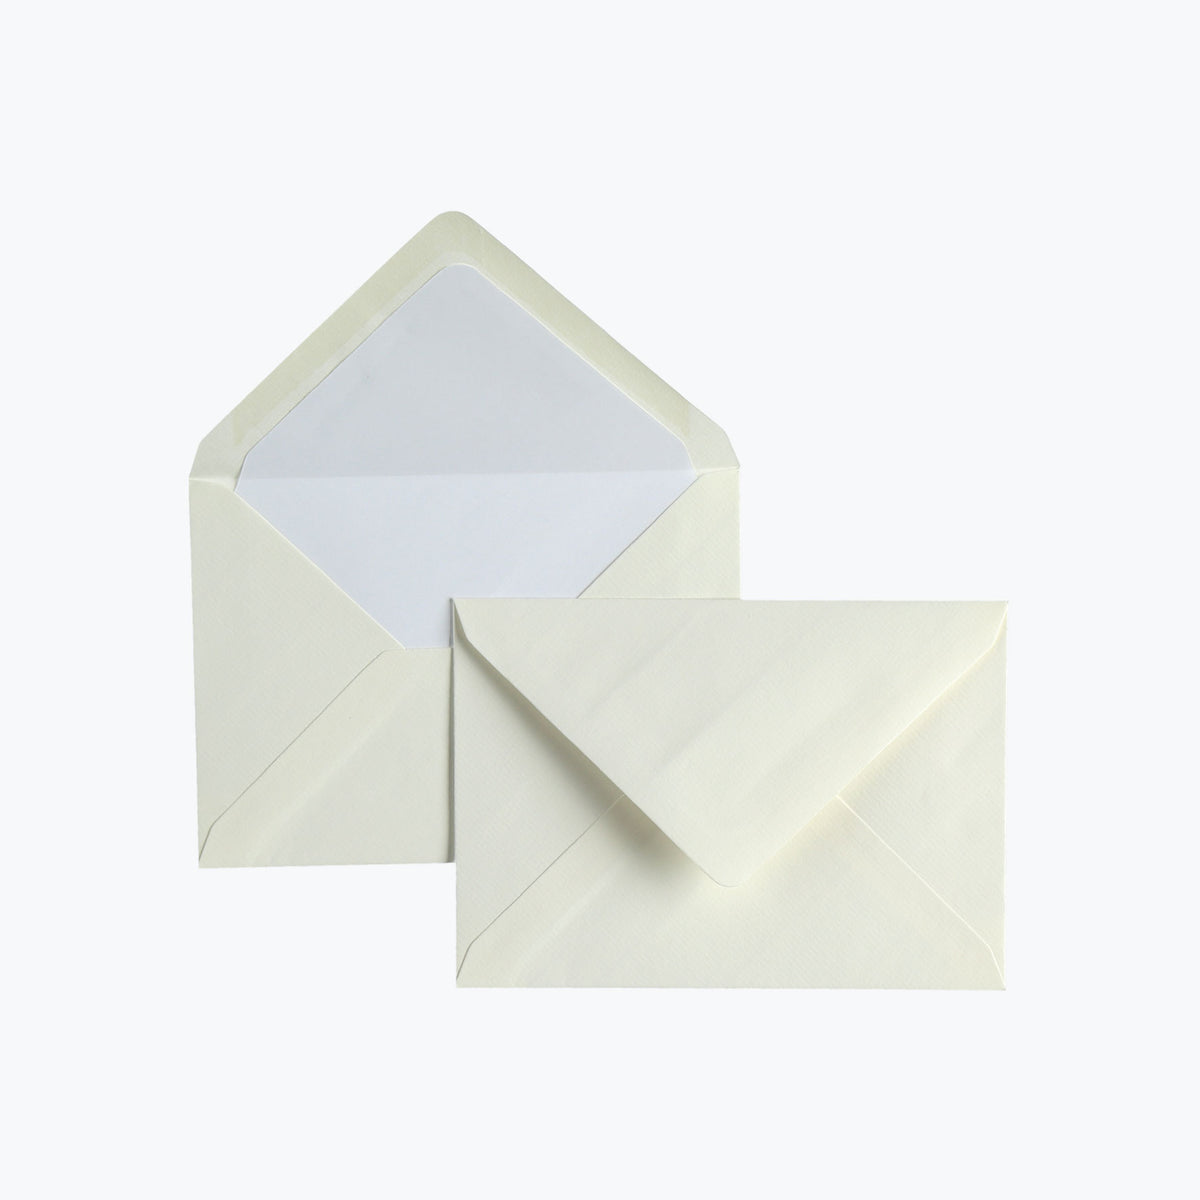 Crown Mill - Envelopes - Lined - C6  - Cream